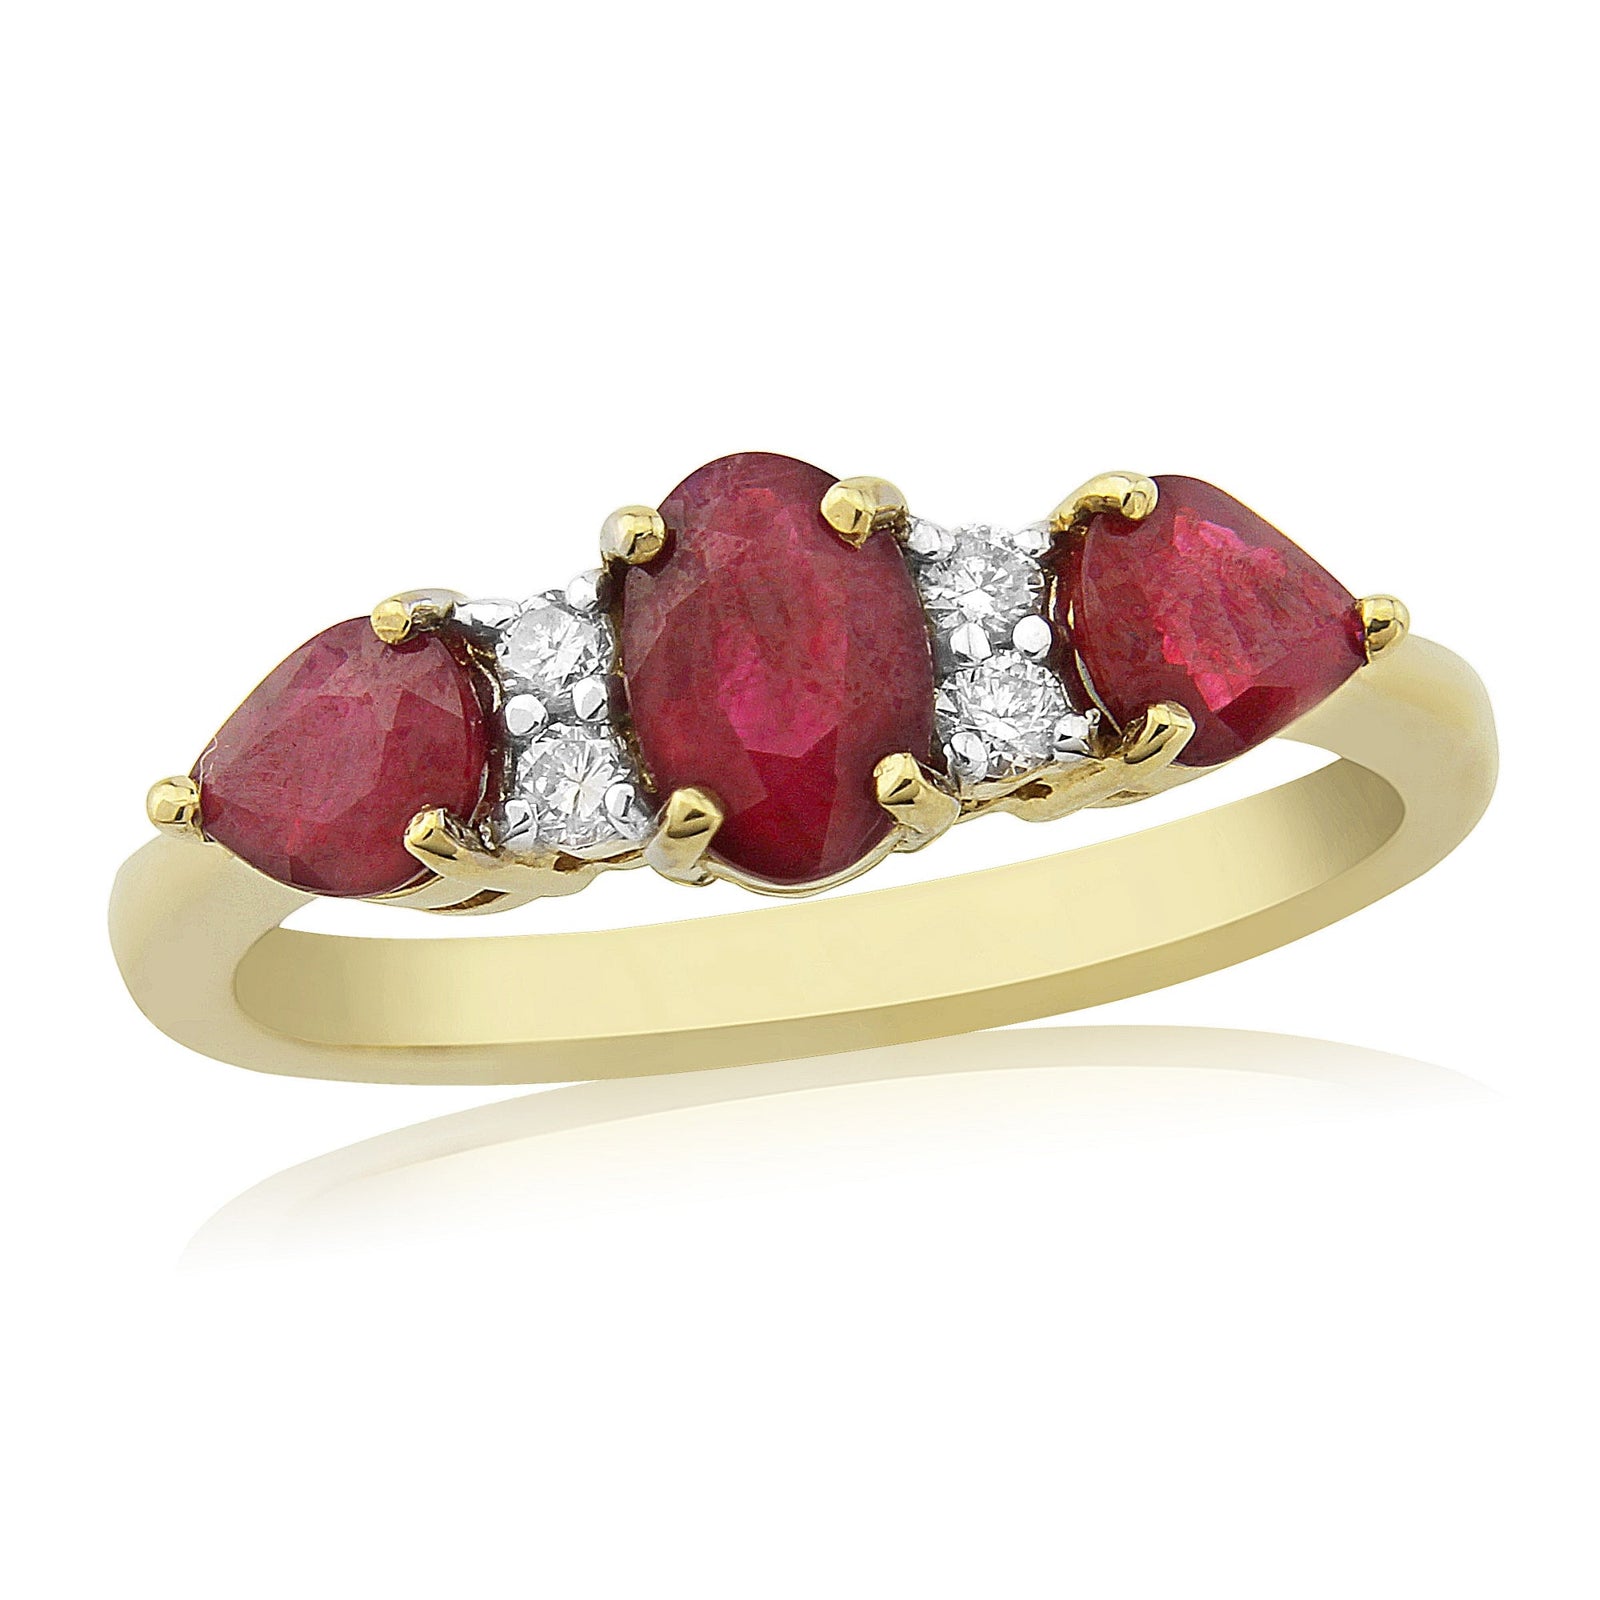 9ct 6x4mm oval ruby with two 5x4mm pear shape rubies & diamond ring 0.11ct